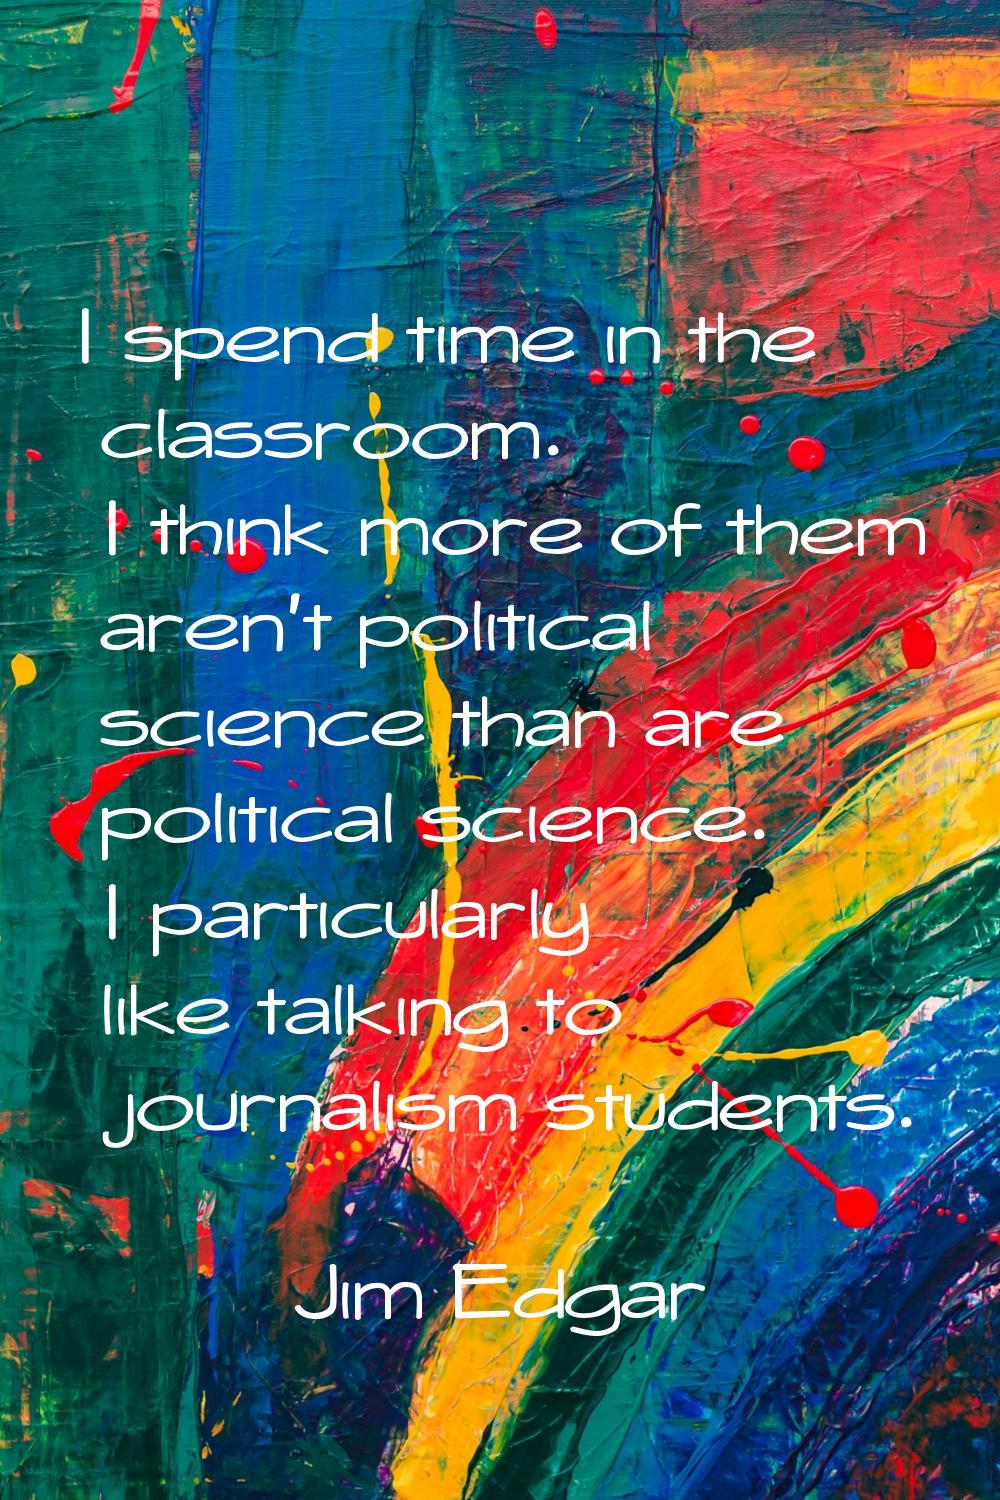 I spend time in the classroom. I think more of them aren't political science than are political sci